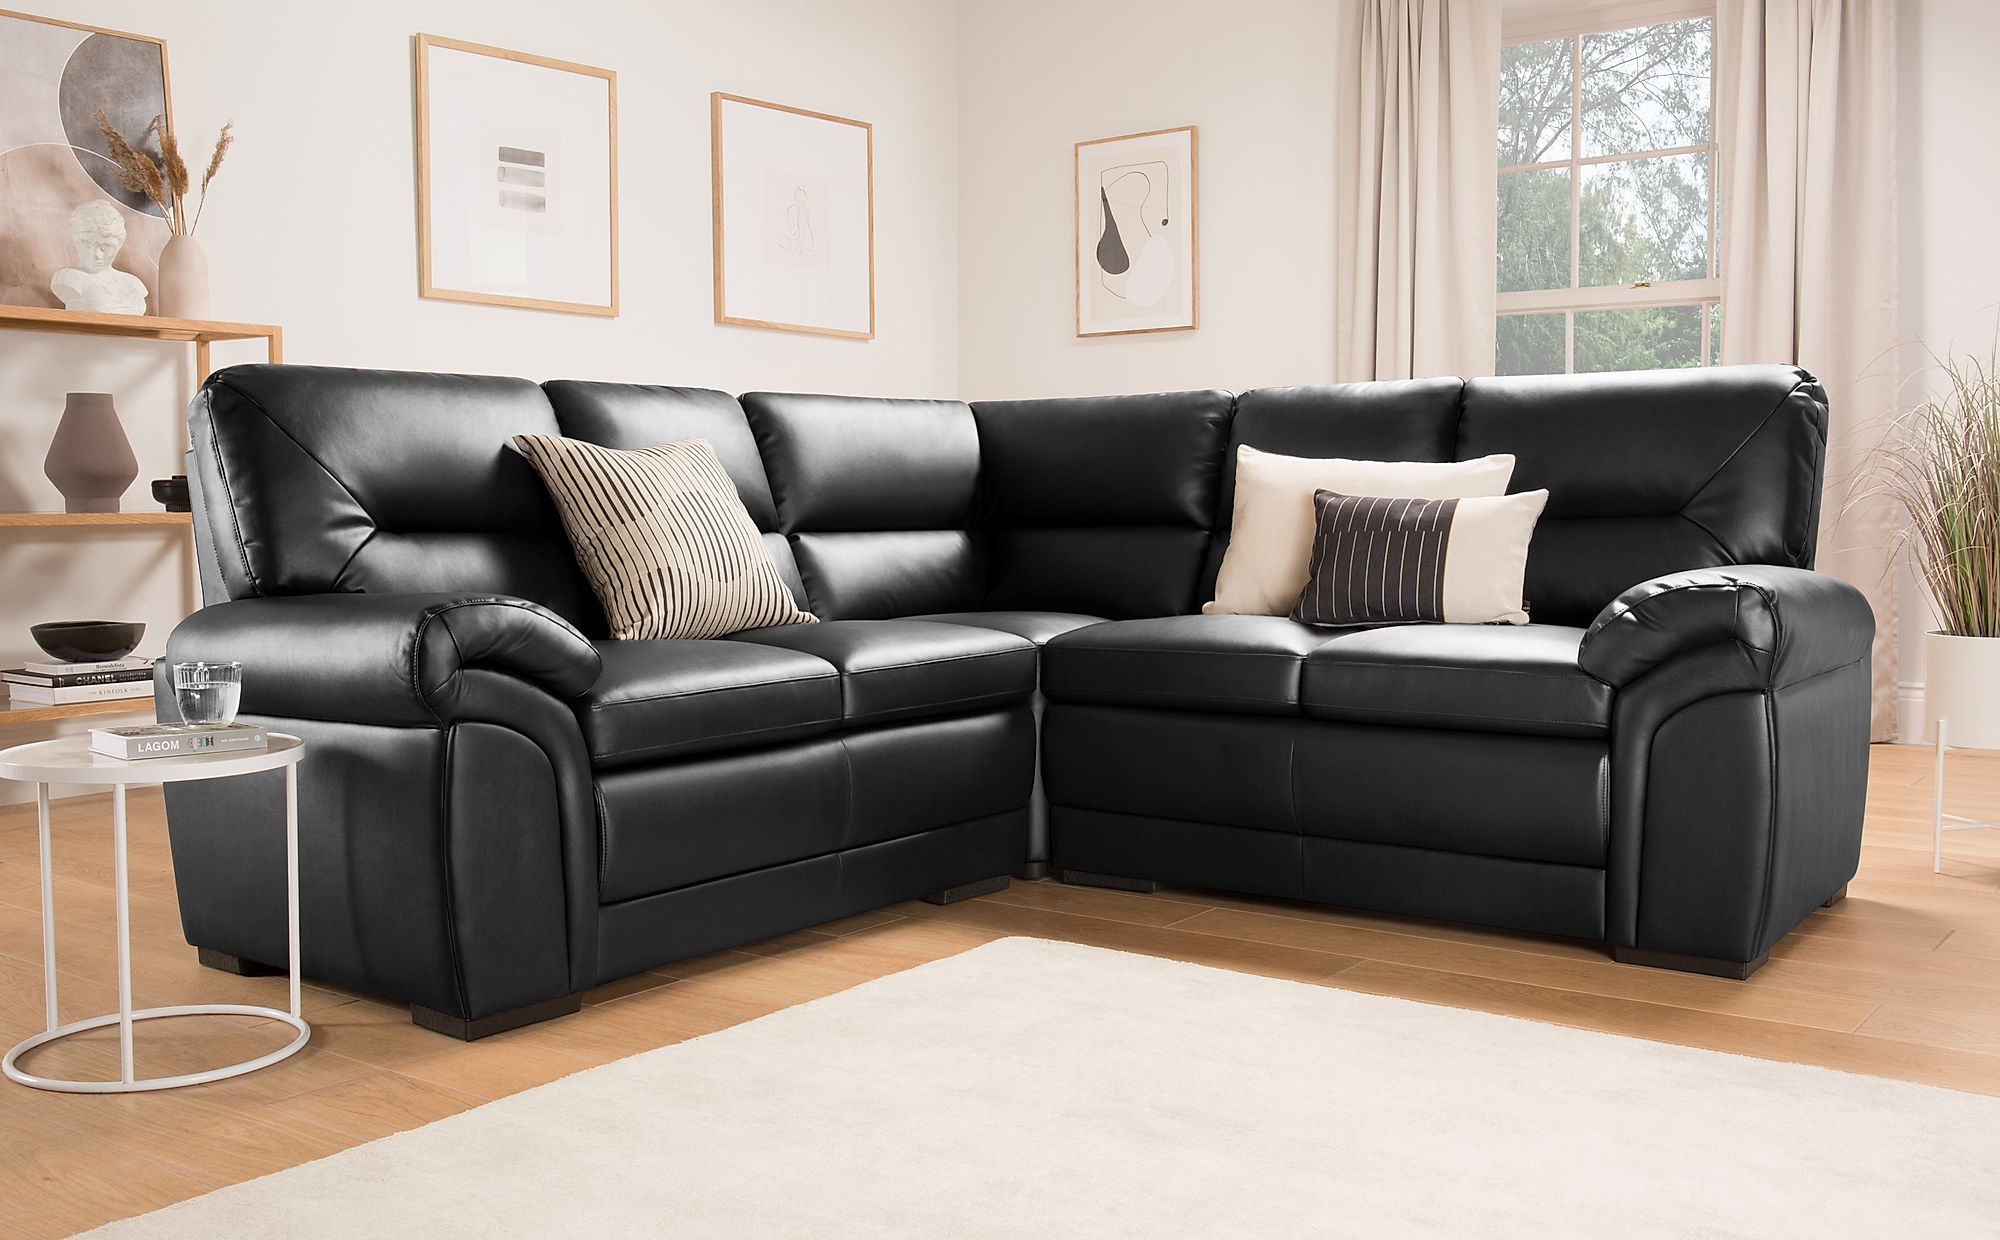 black leather corner sofa with matching rugs